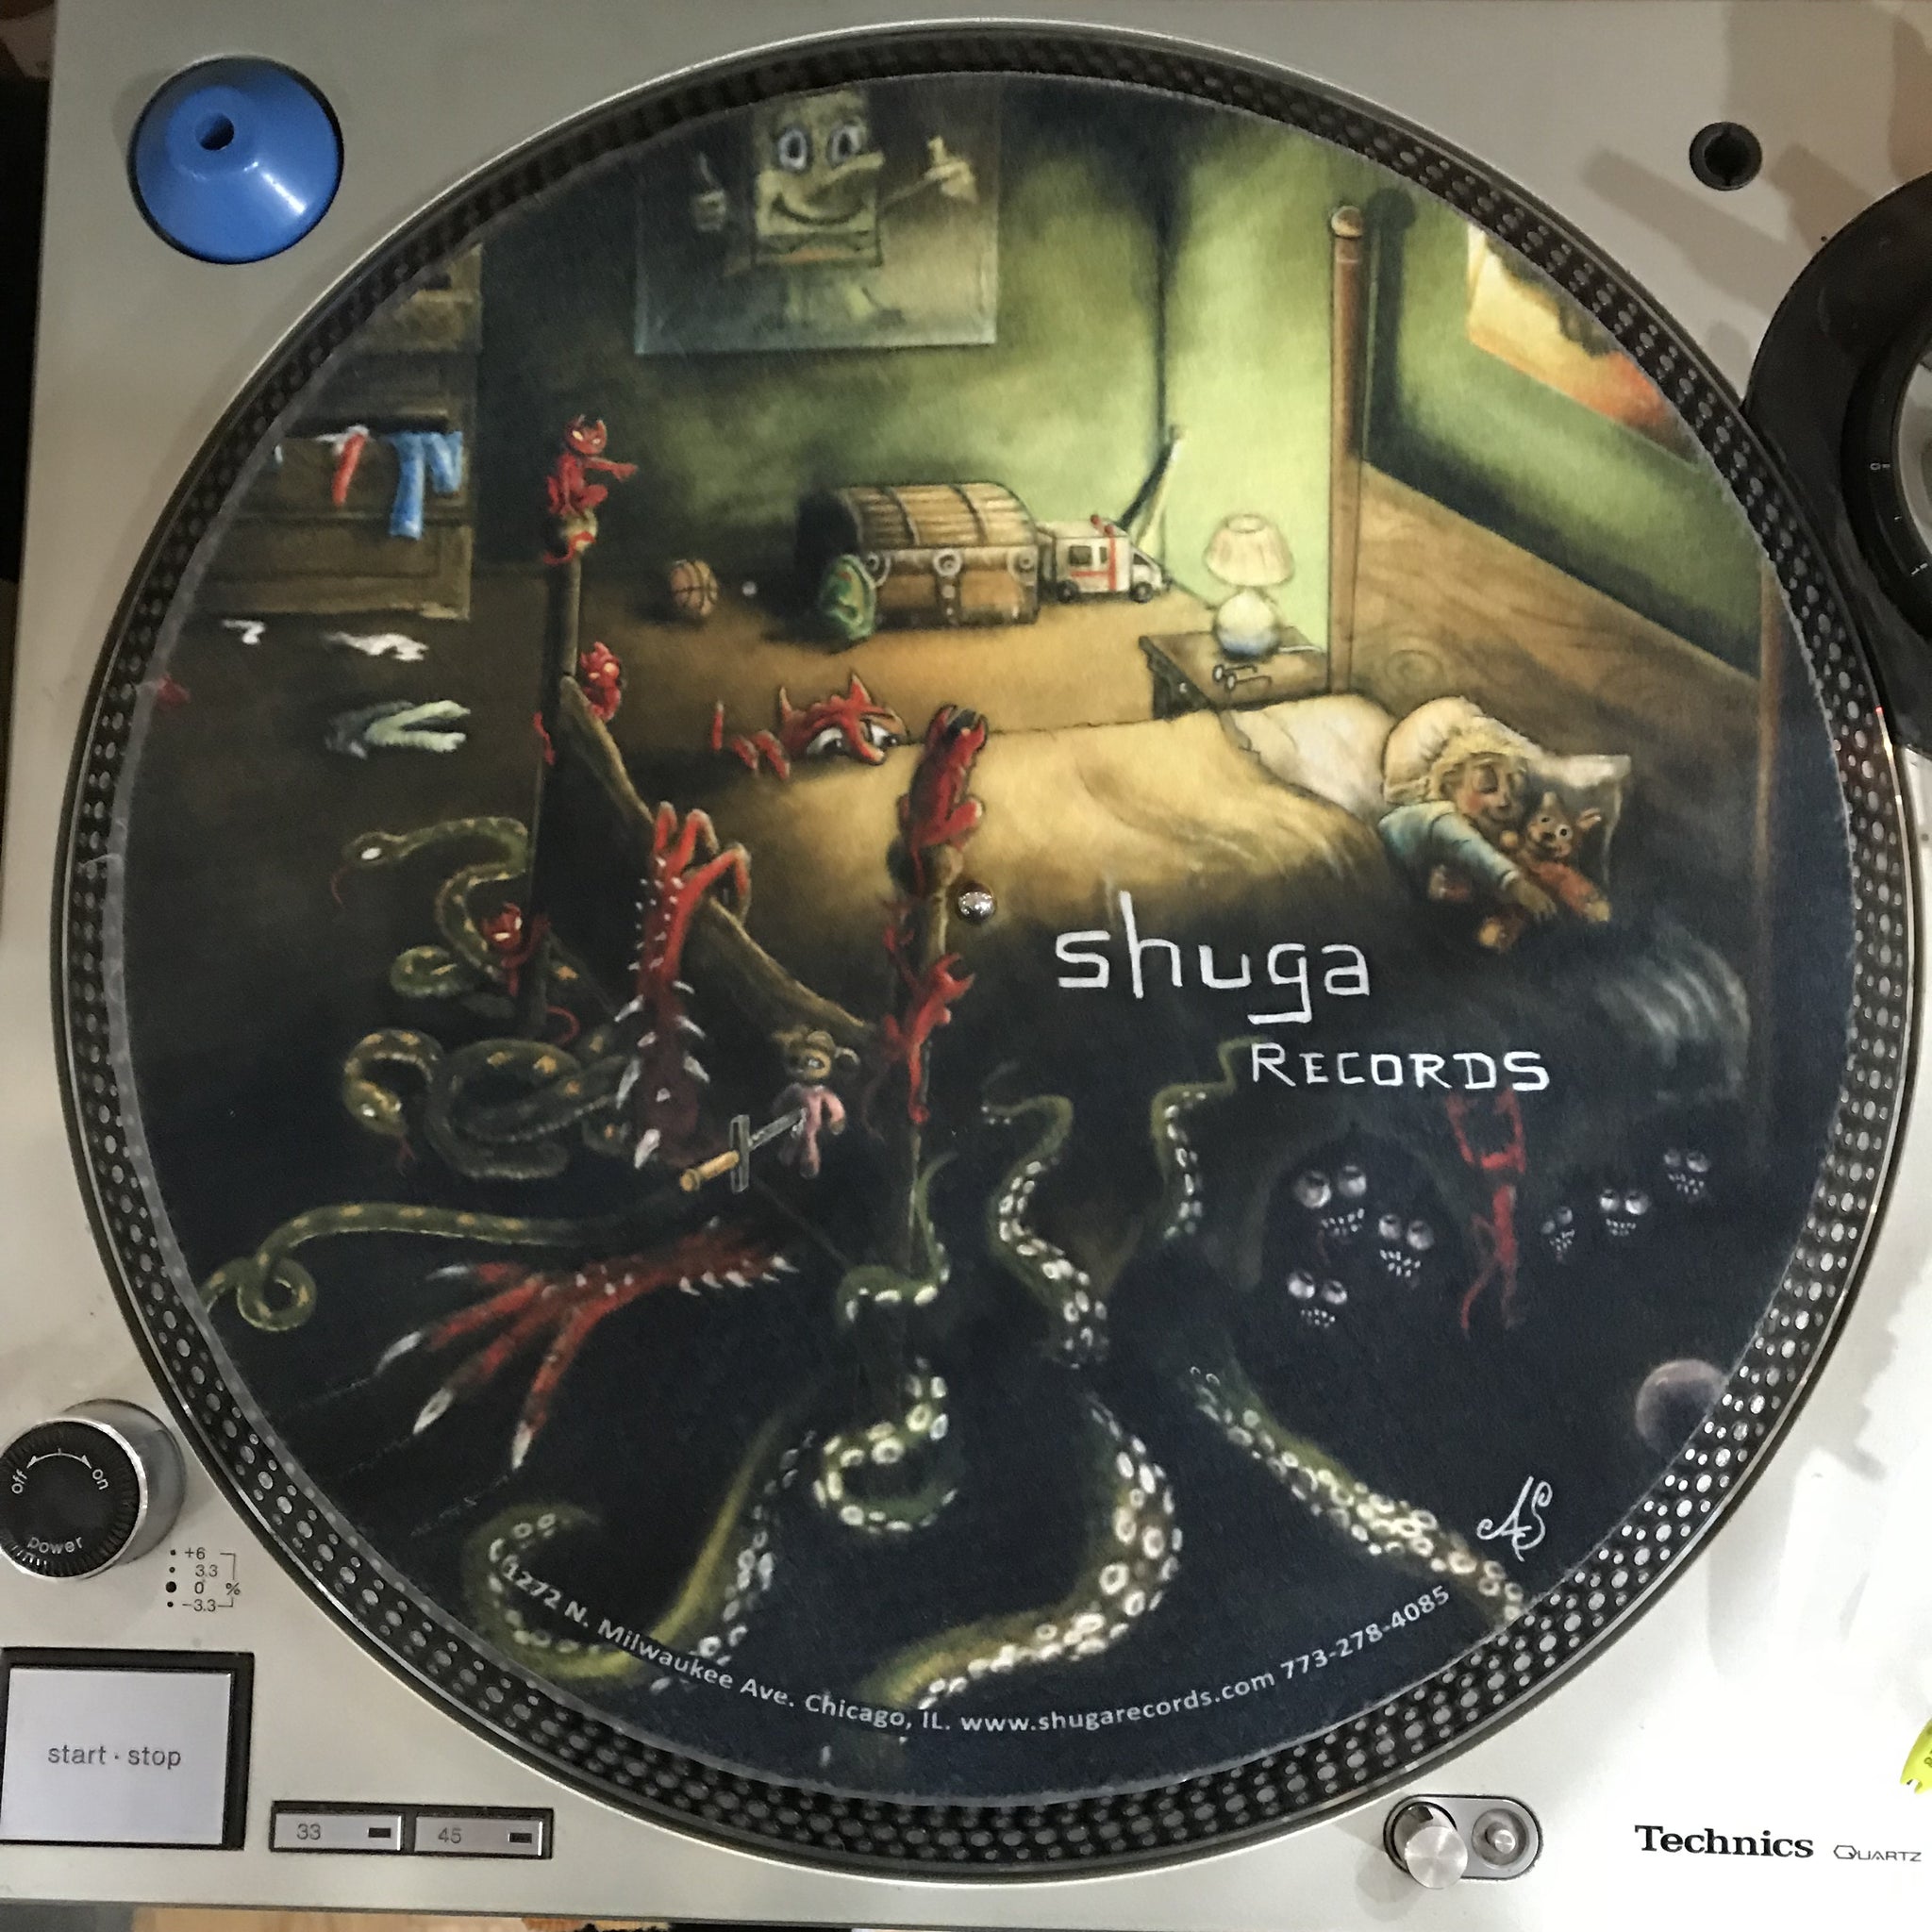 Shuga Records 2018 Limited Edition Vinyl Record Slipmat Monsters Under The Bed